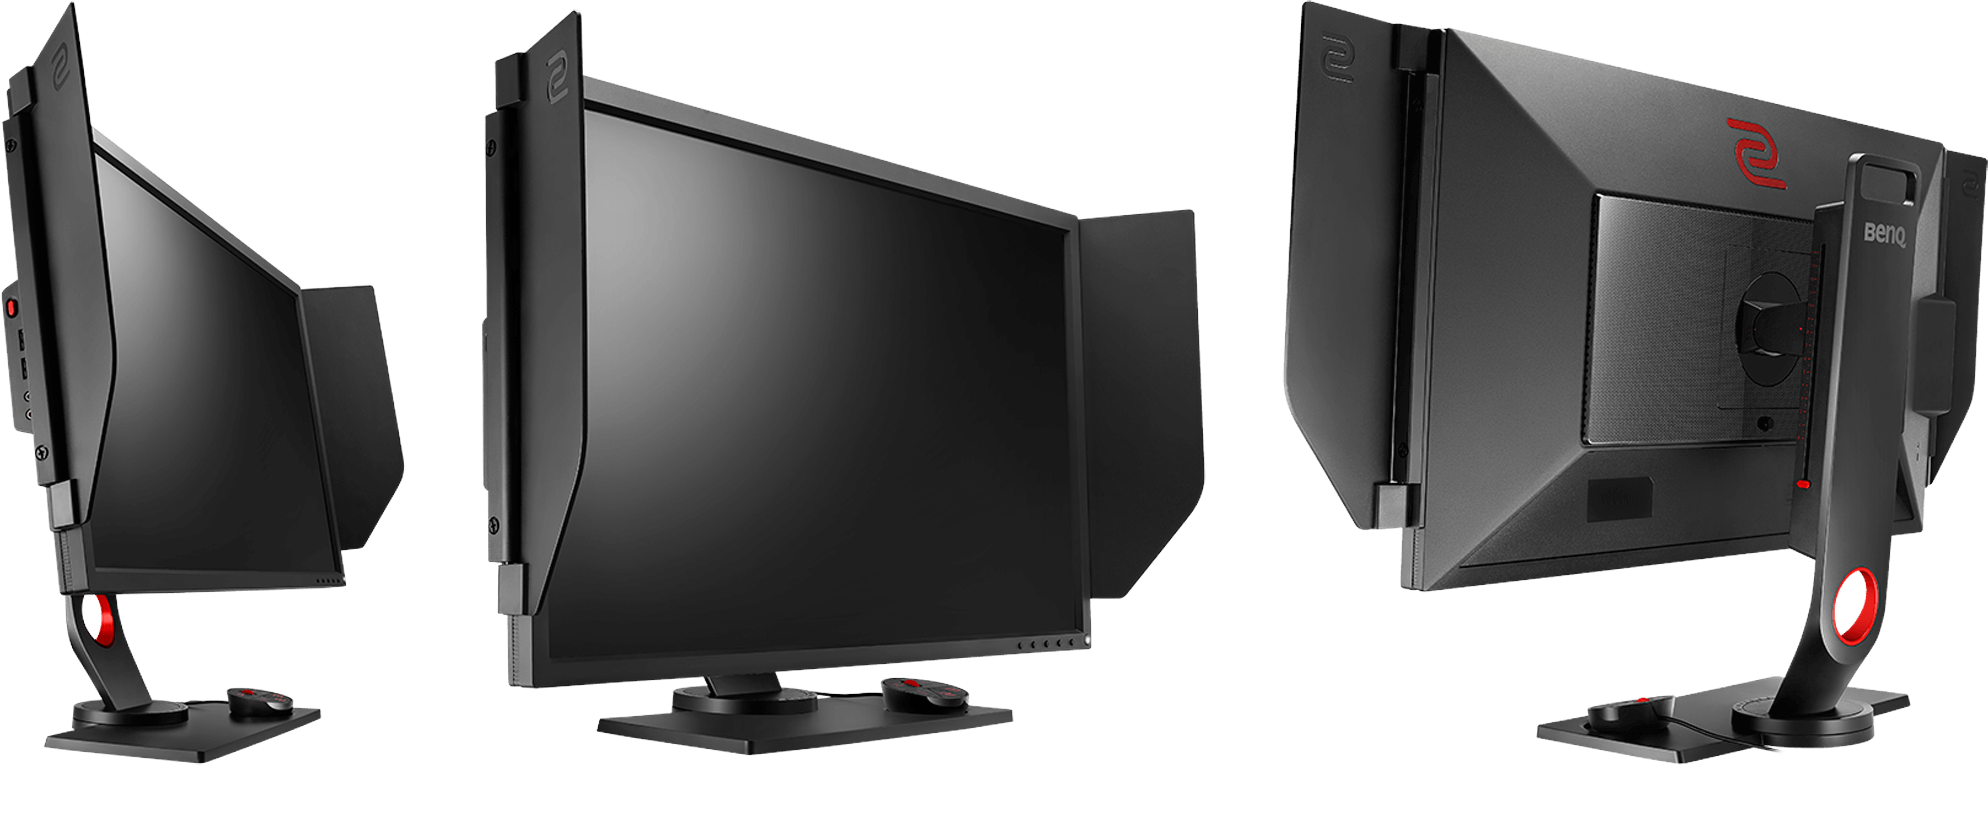 Acer: New monitor with 240 Hz and 0.5 ms response time introduced -   News